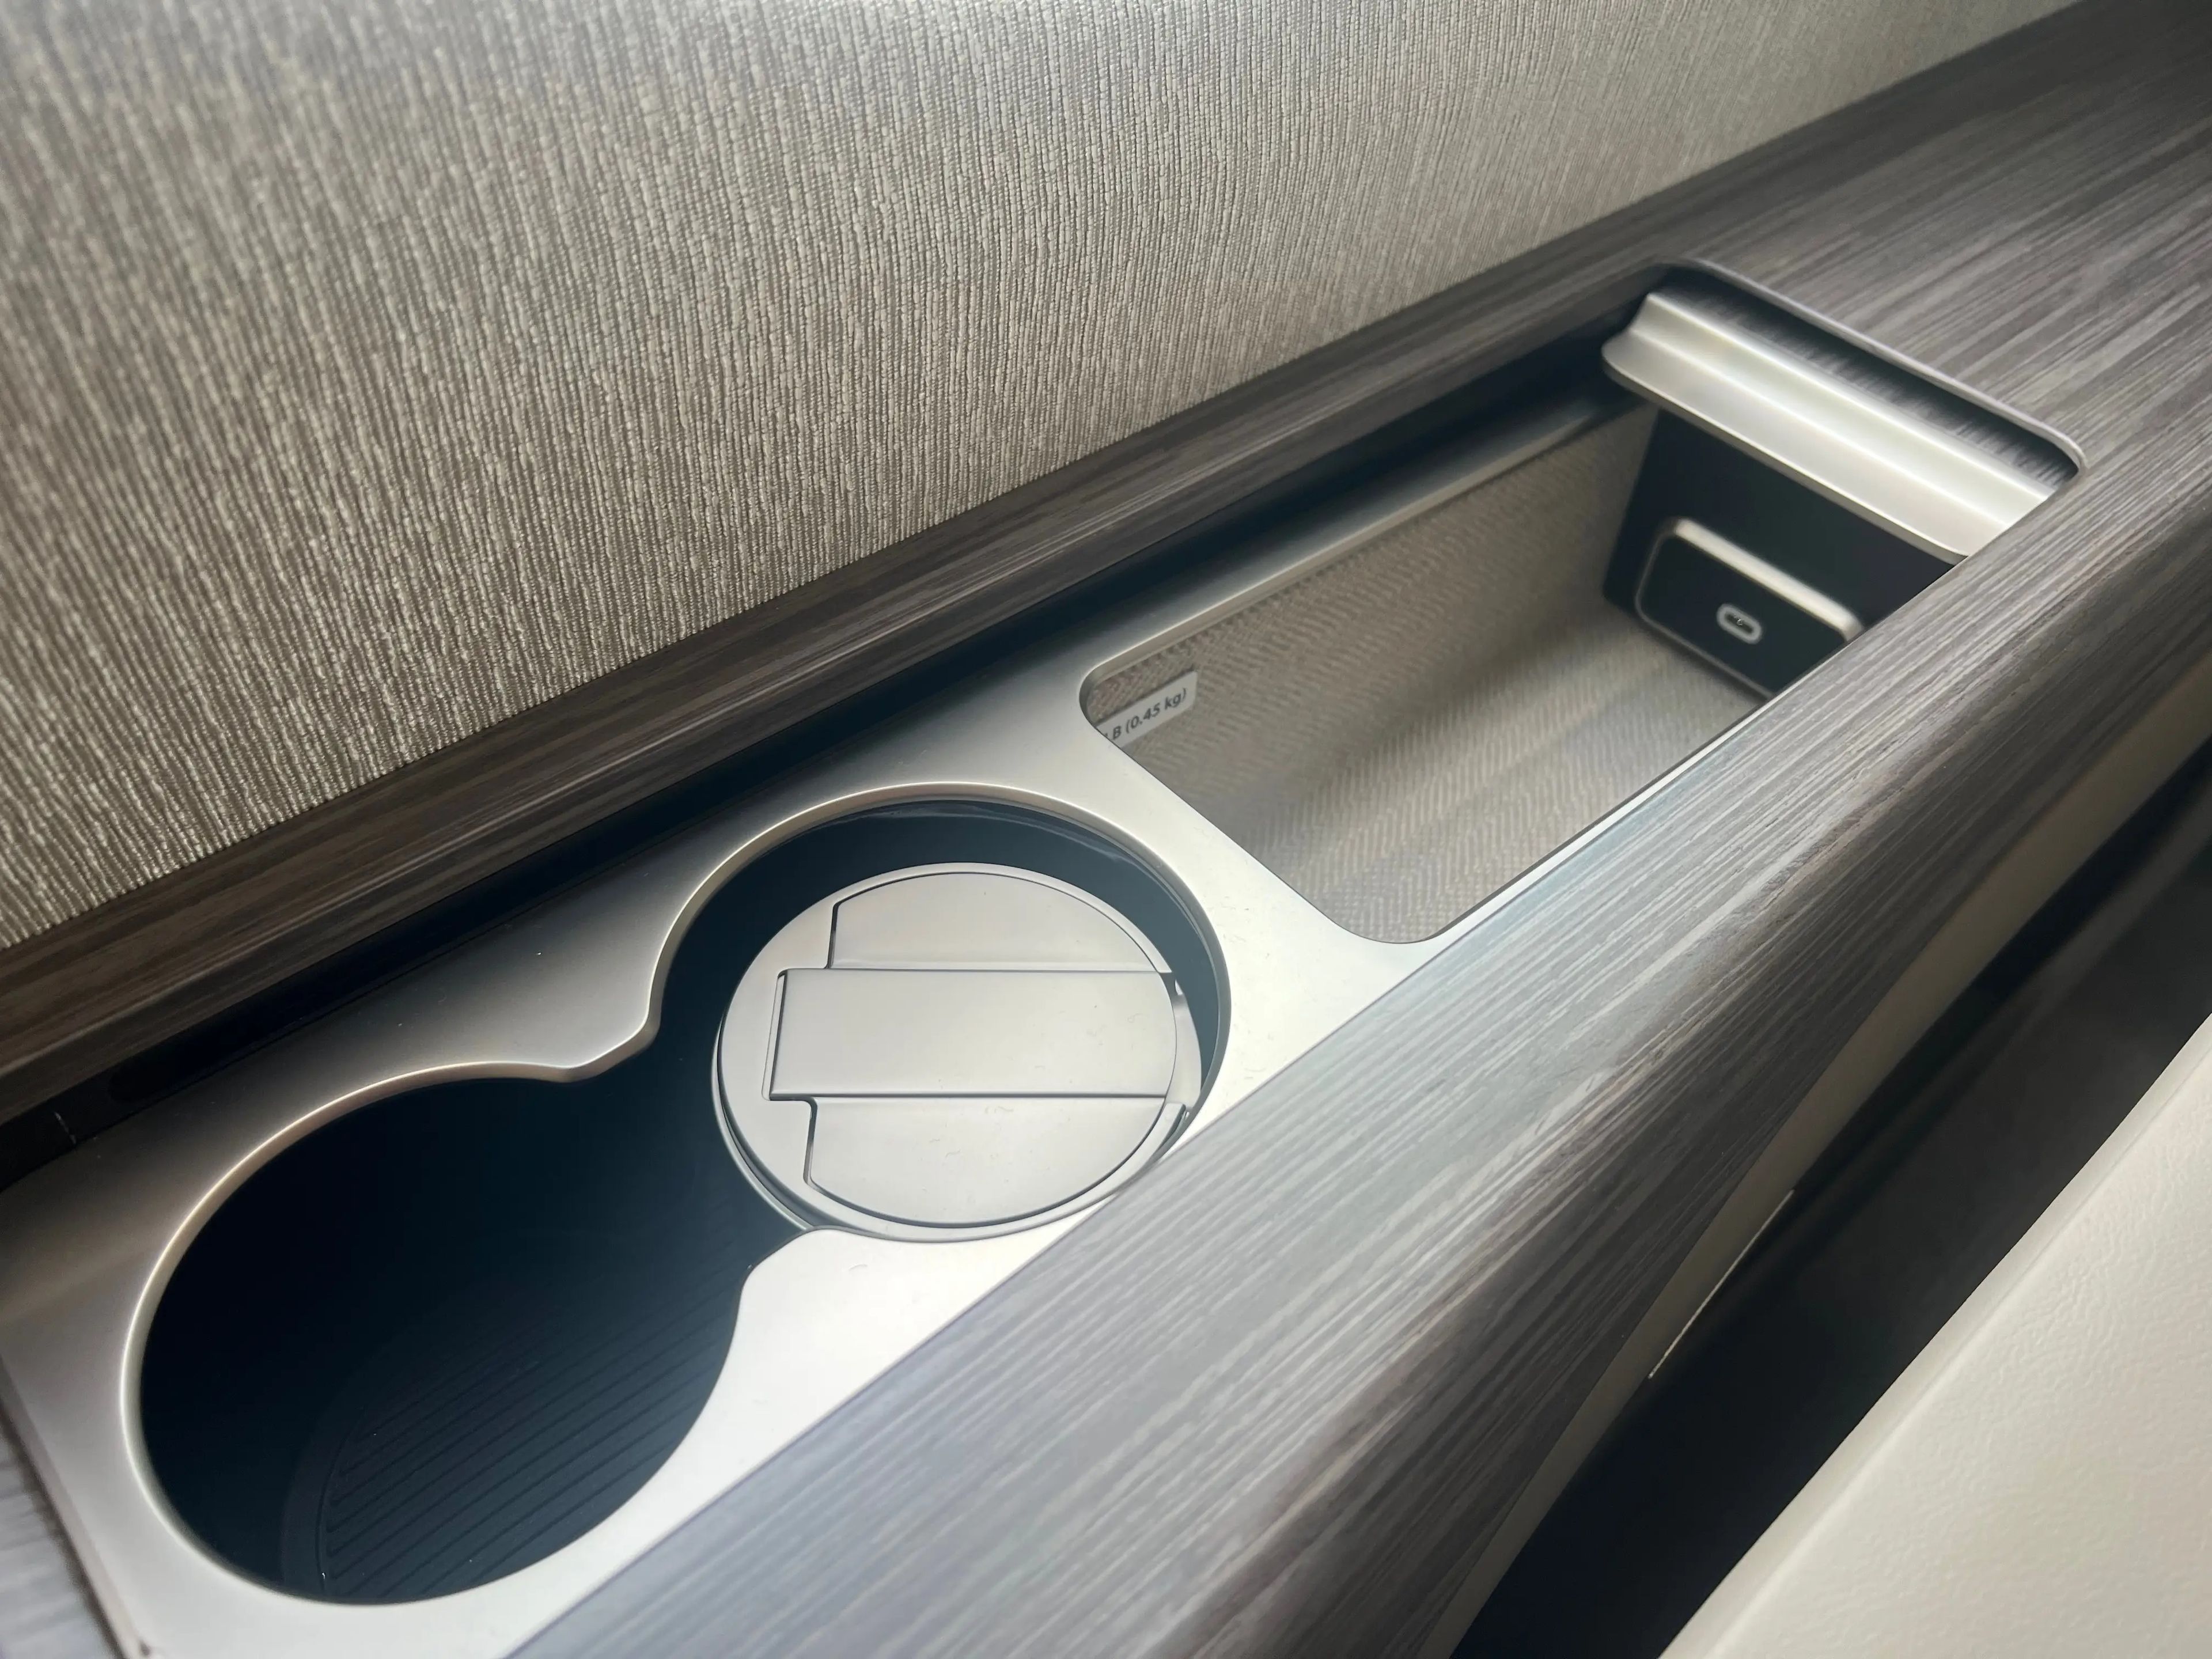 The cupholders and the charging port under sliding compartments.